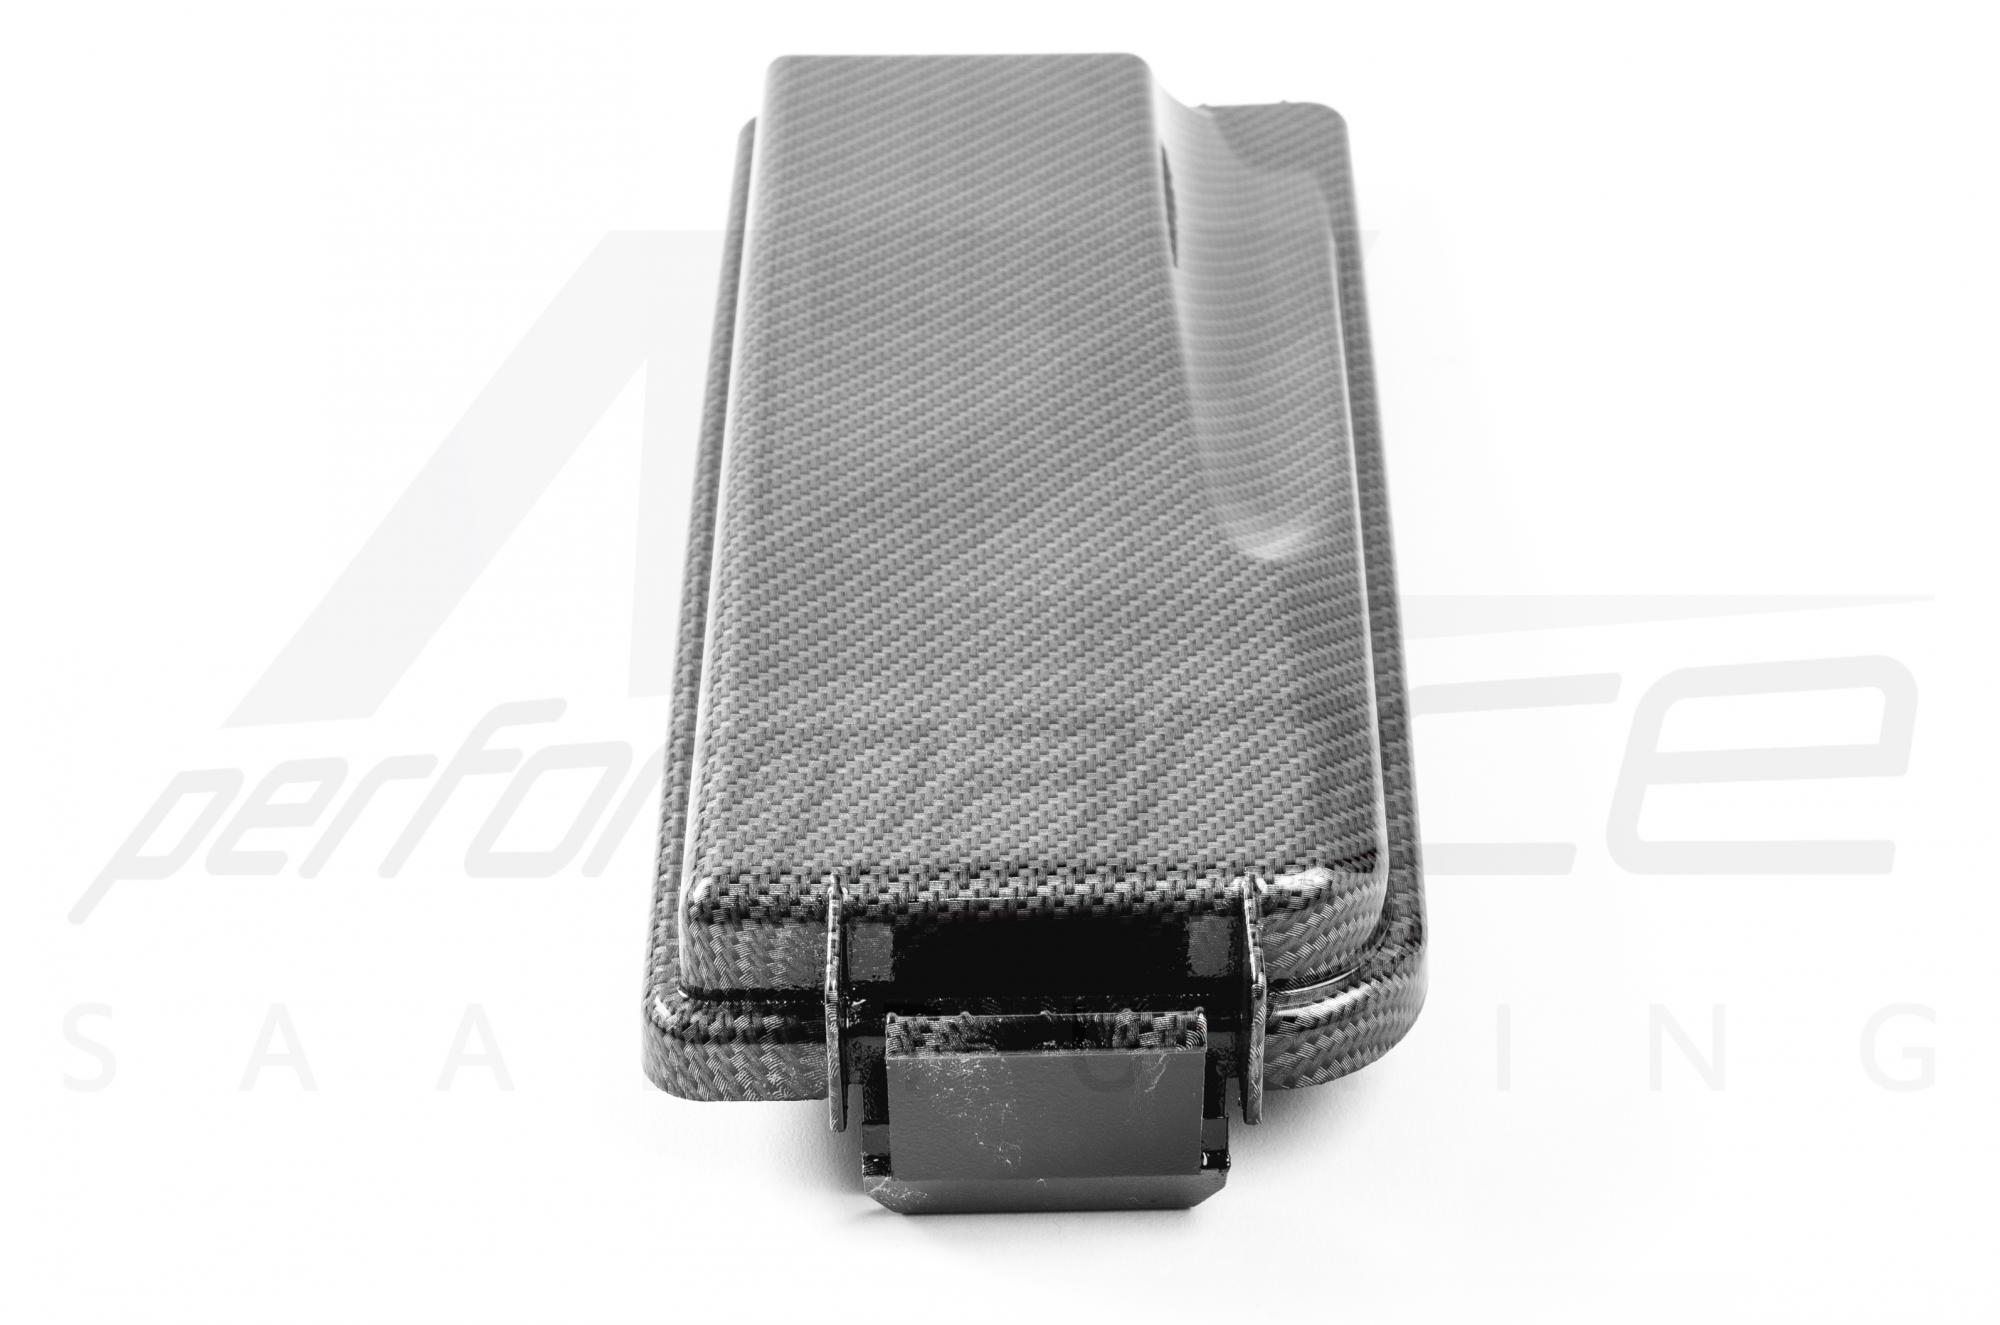 Shiny Carbon-Silver Fuse Box Cover SAAB 9-3 OPEL Vectra C